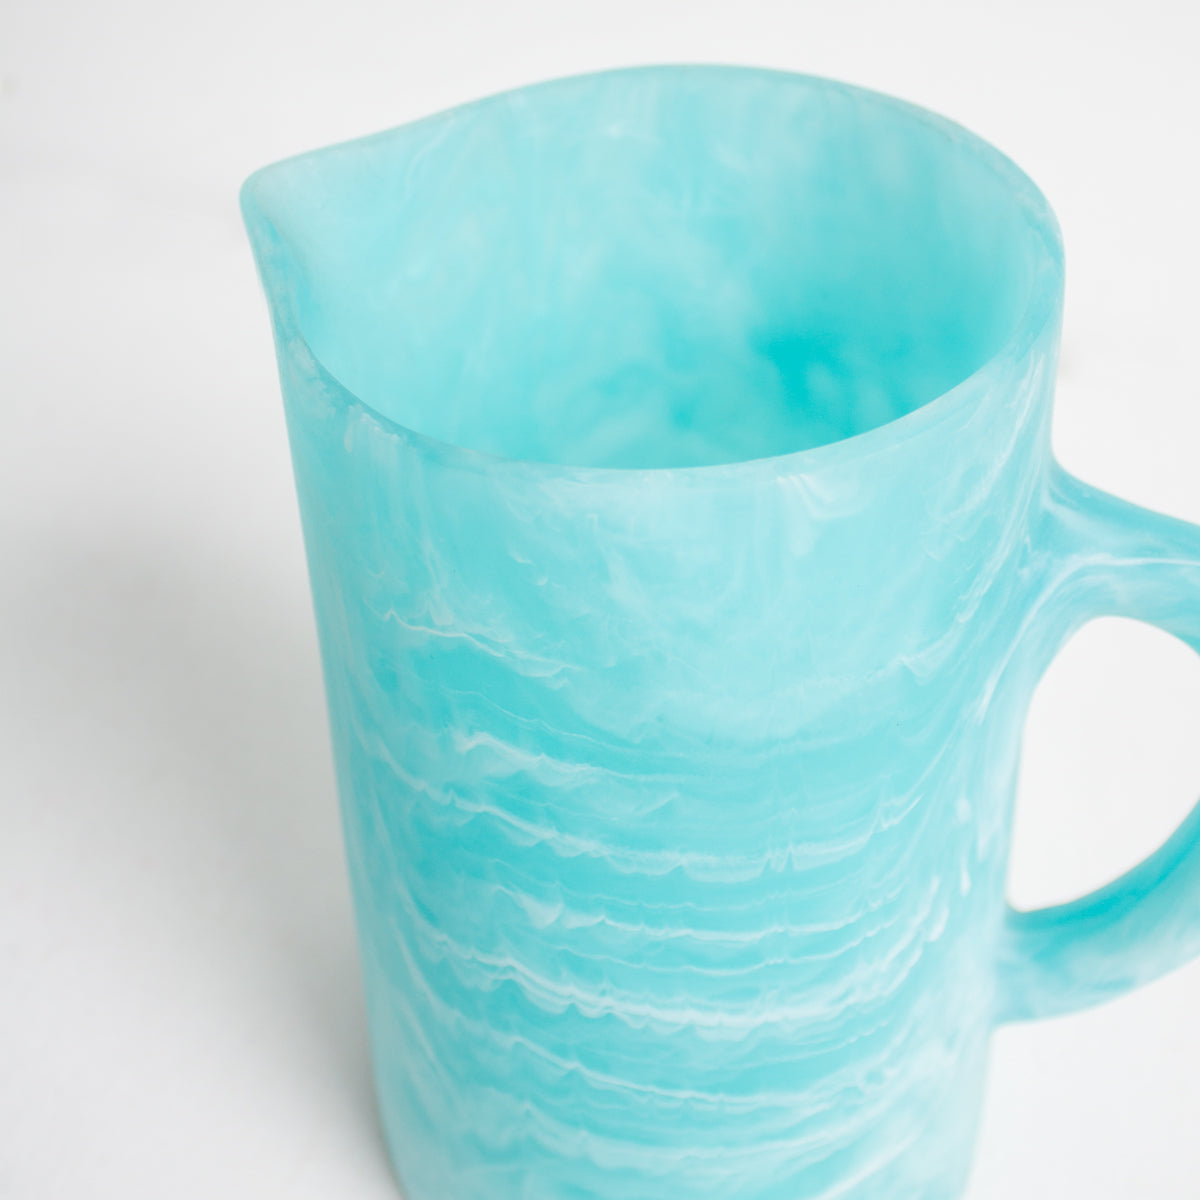 Resin Pitcher - Turquoise Blue